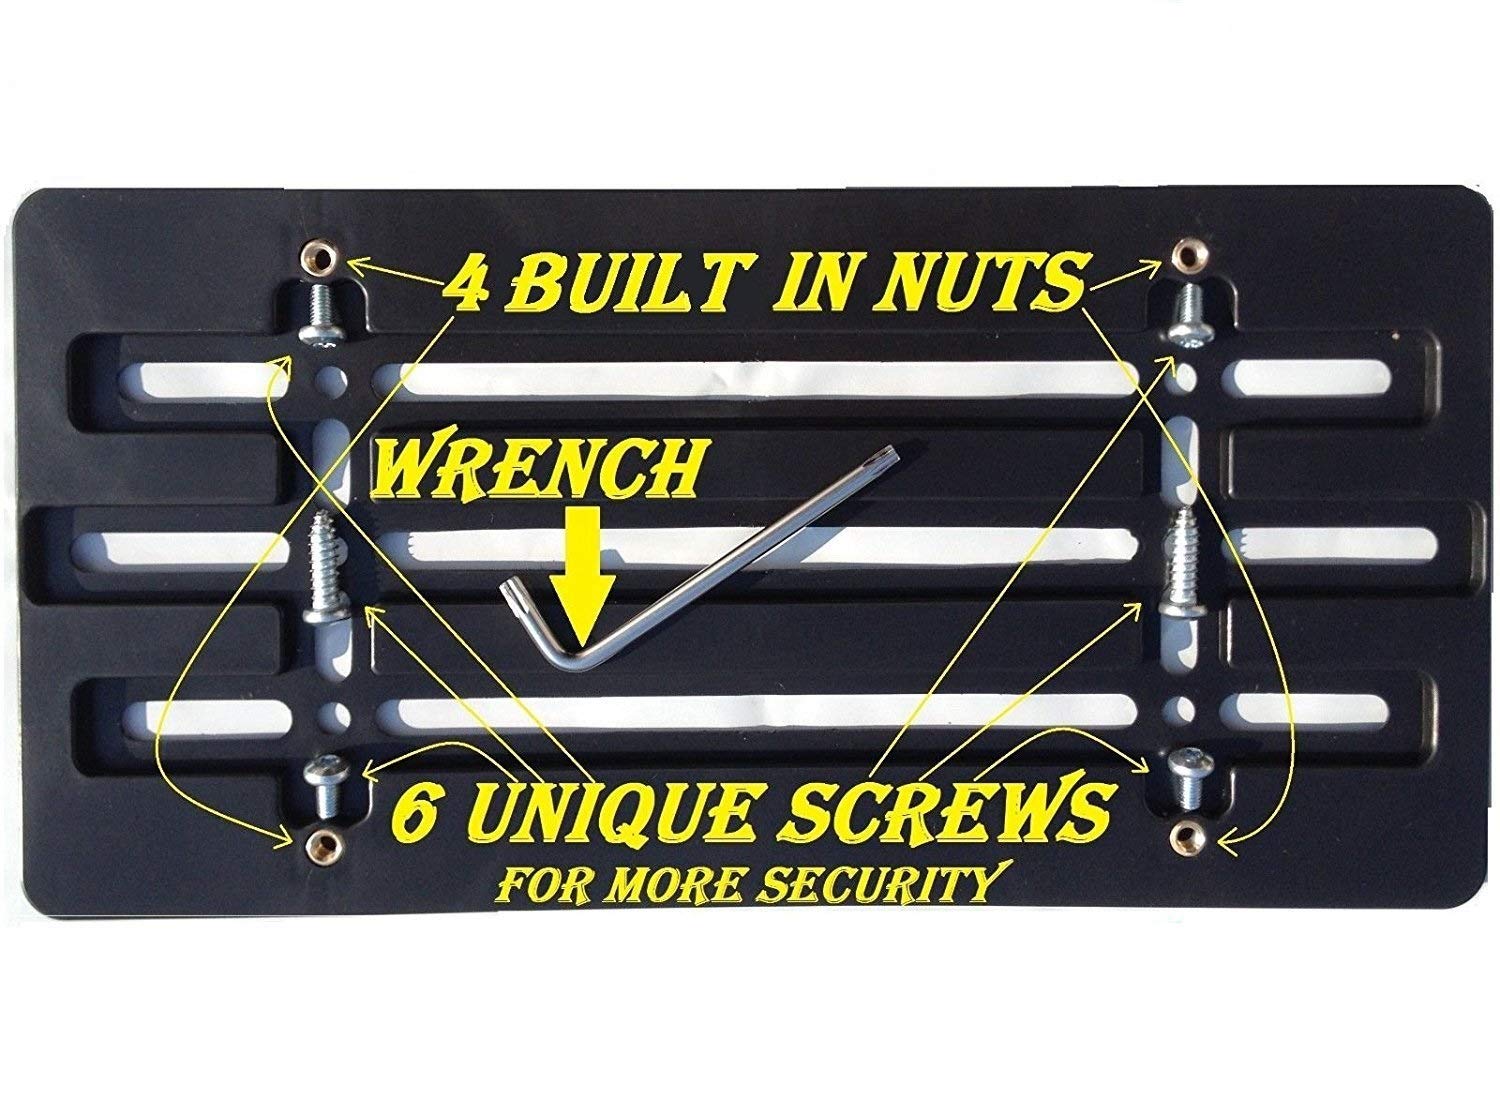 Trunknets Inc Universal Front Bumper License Plate Bracket + 6 Unique Screws and Wrench Kit